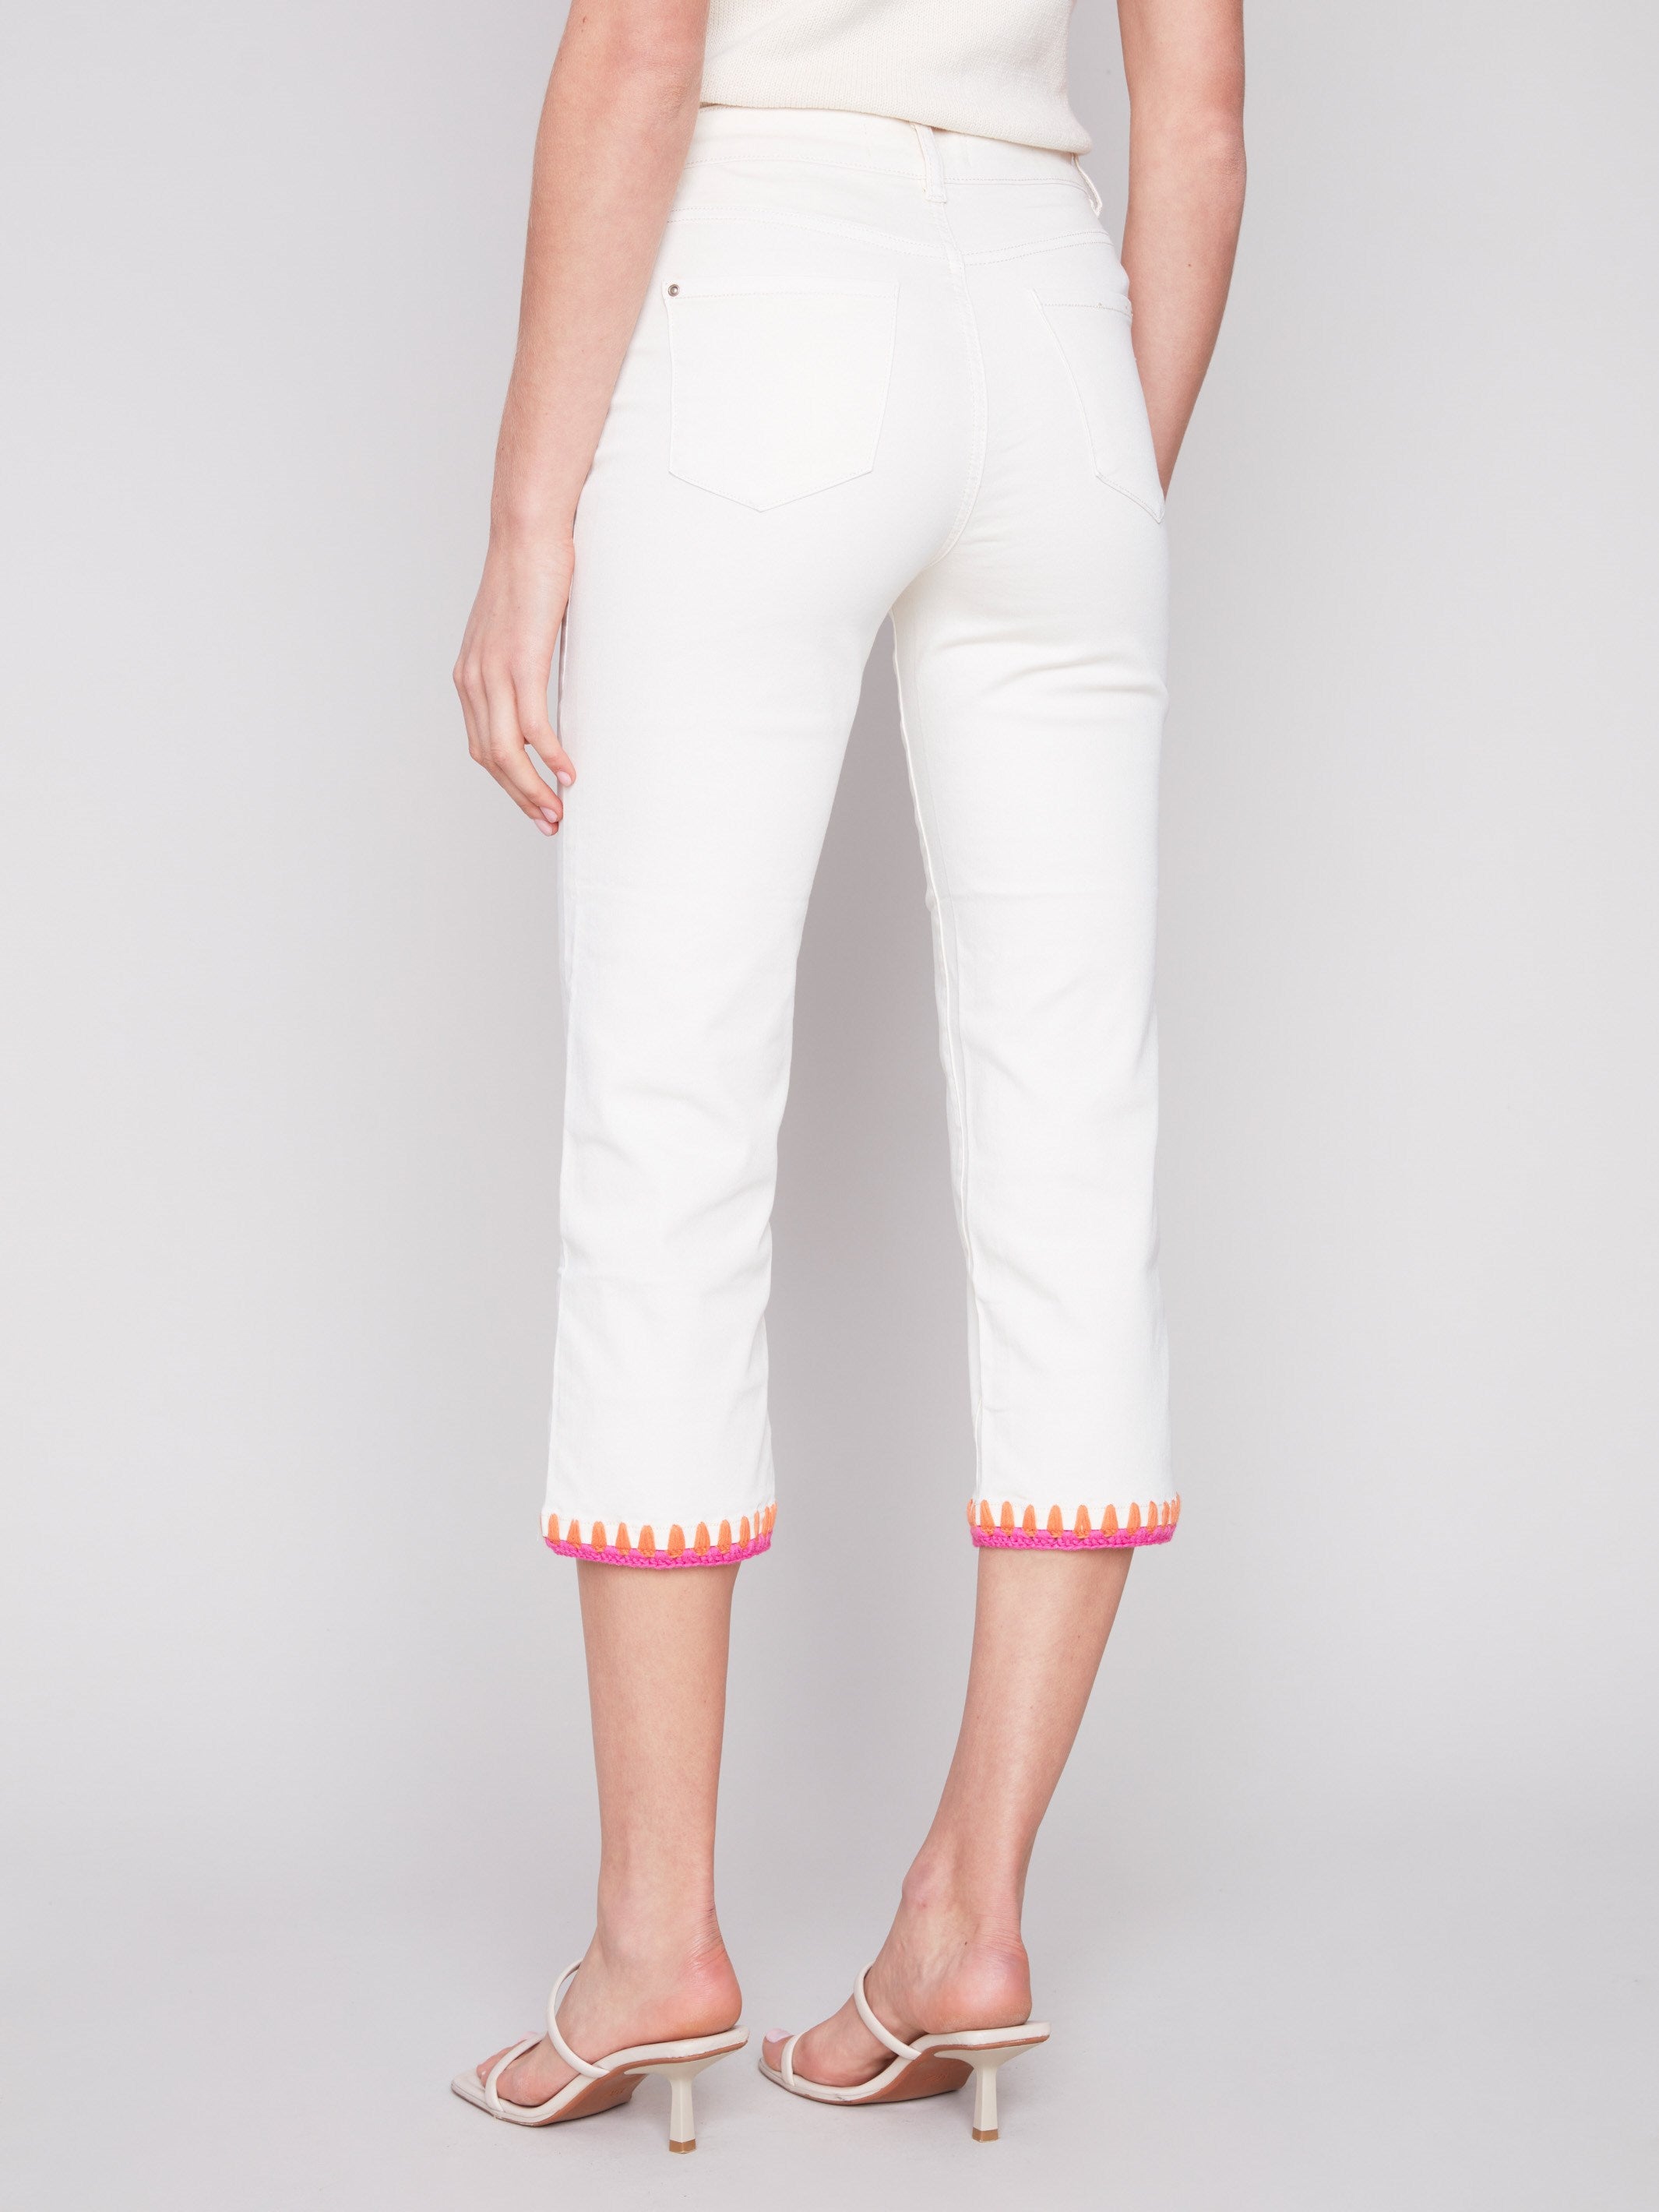 Charlie B Straight Leg Jeans with Embroidered Stitch Hem - Natural - Image 3